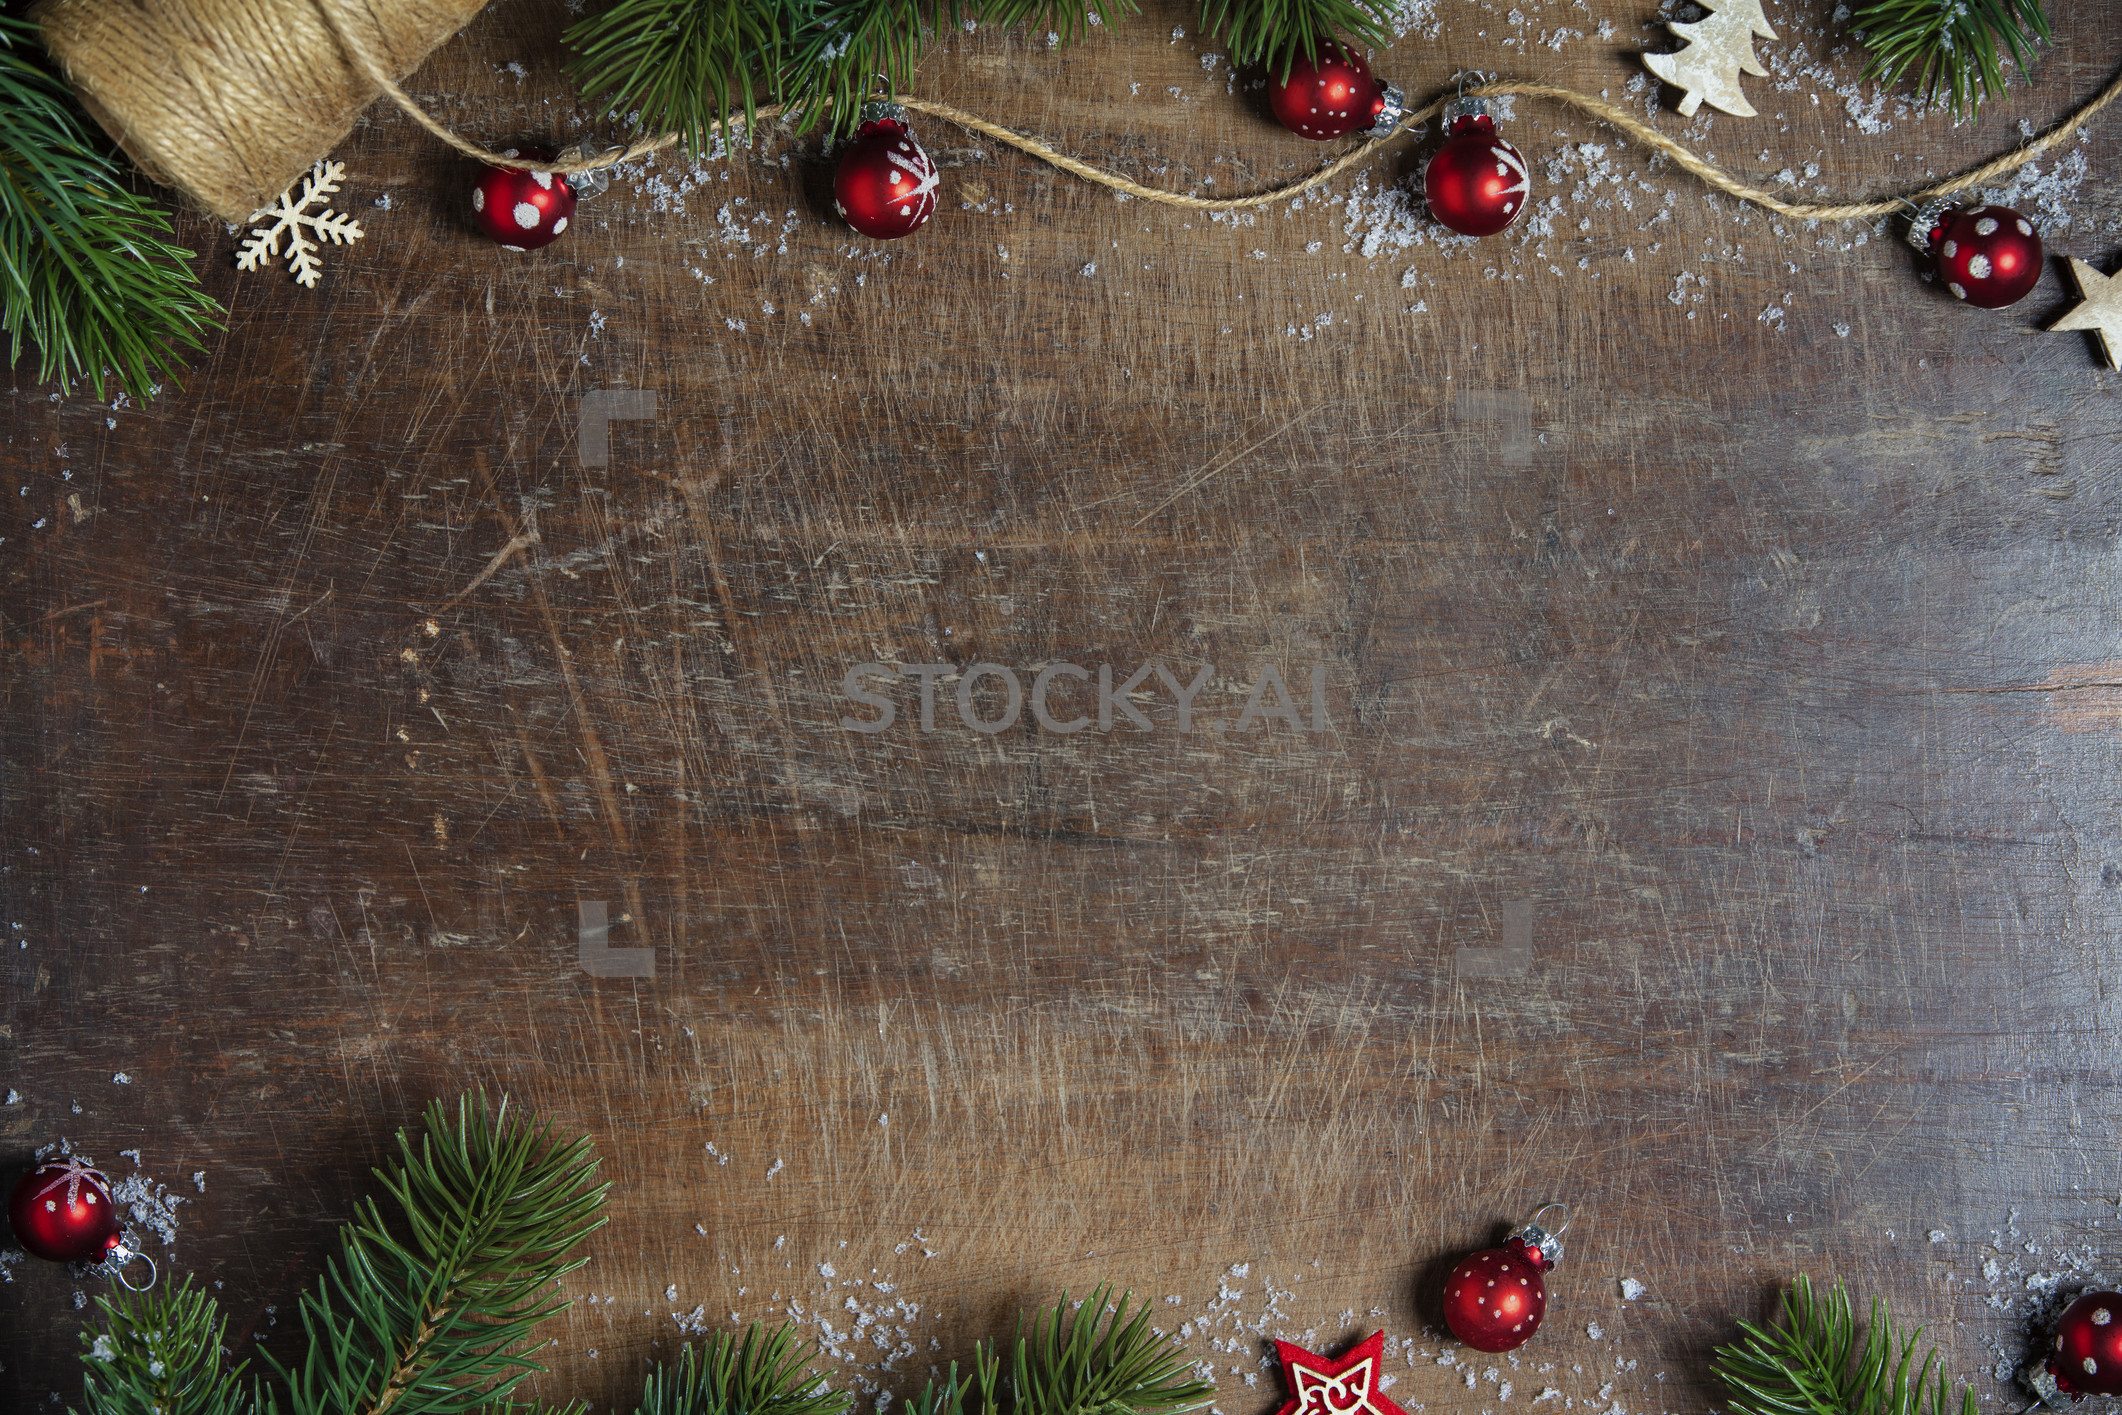 2122x1415 Image of Christmas theme background in vintage tone, space for text